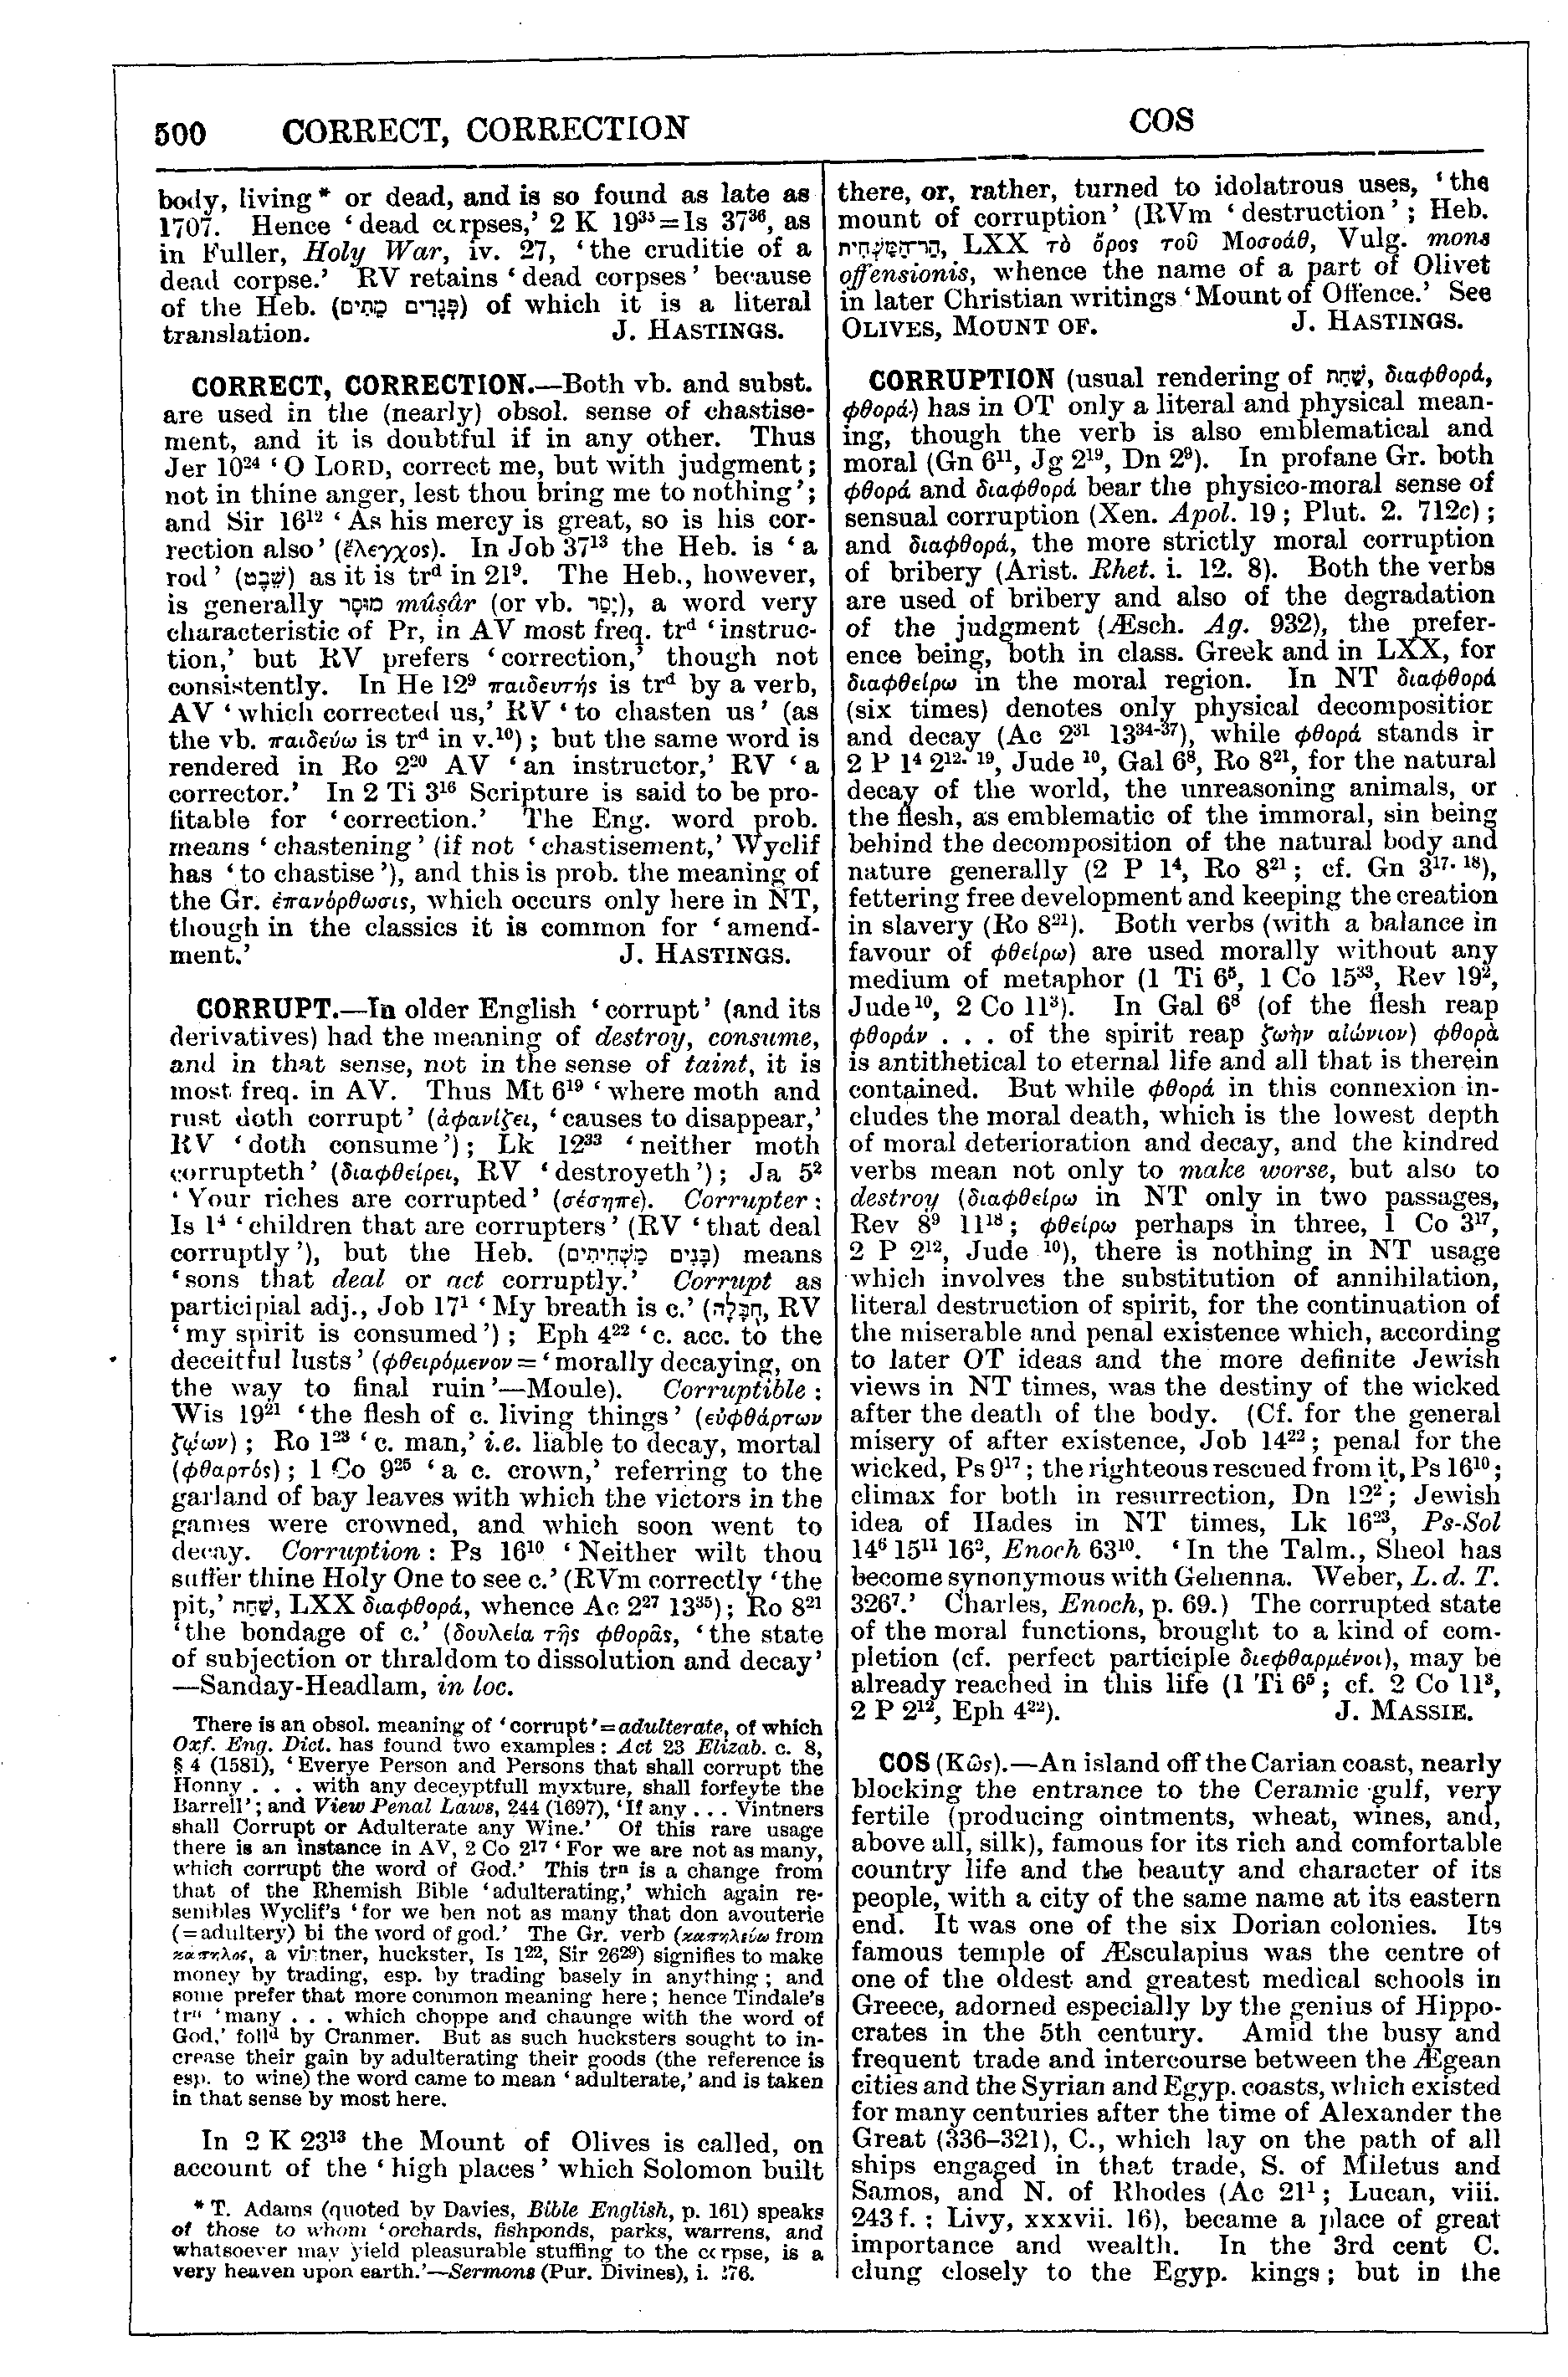 Image of page 500